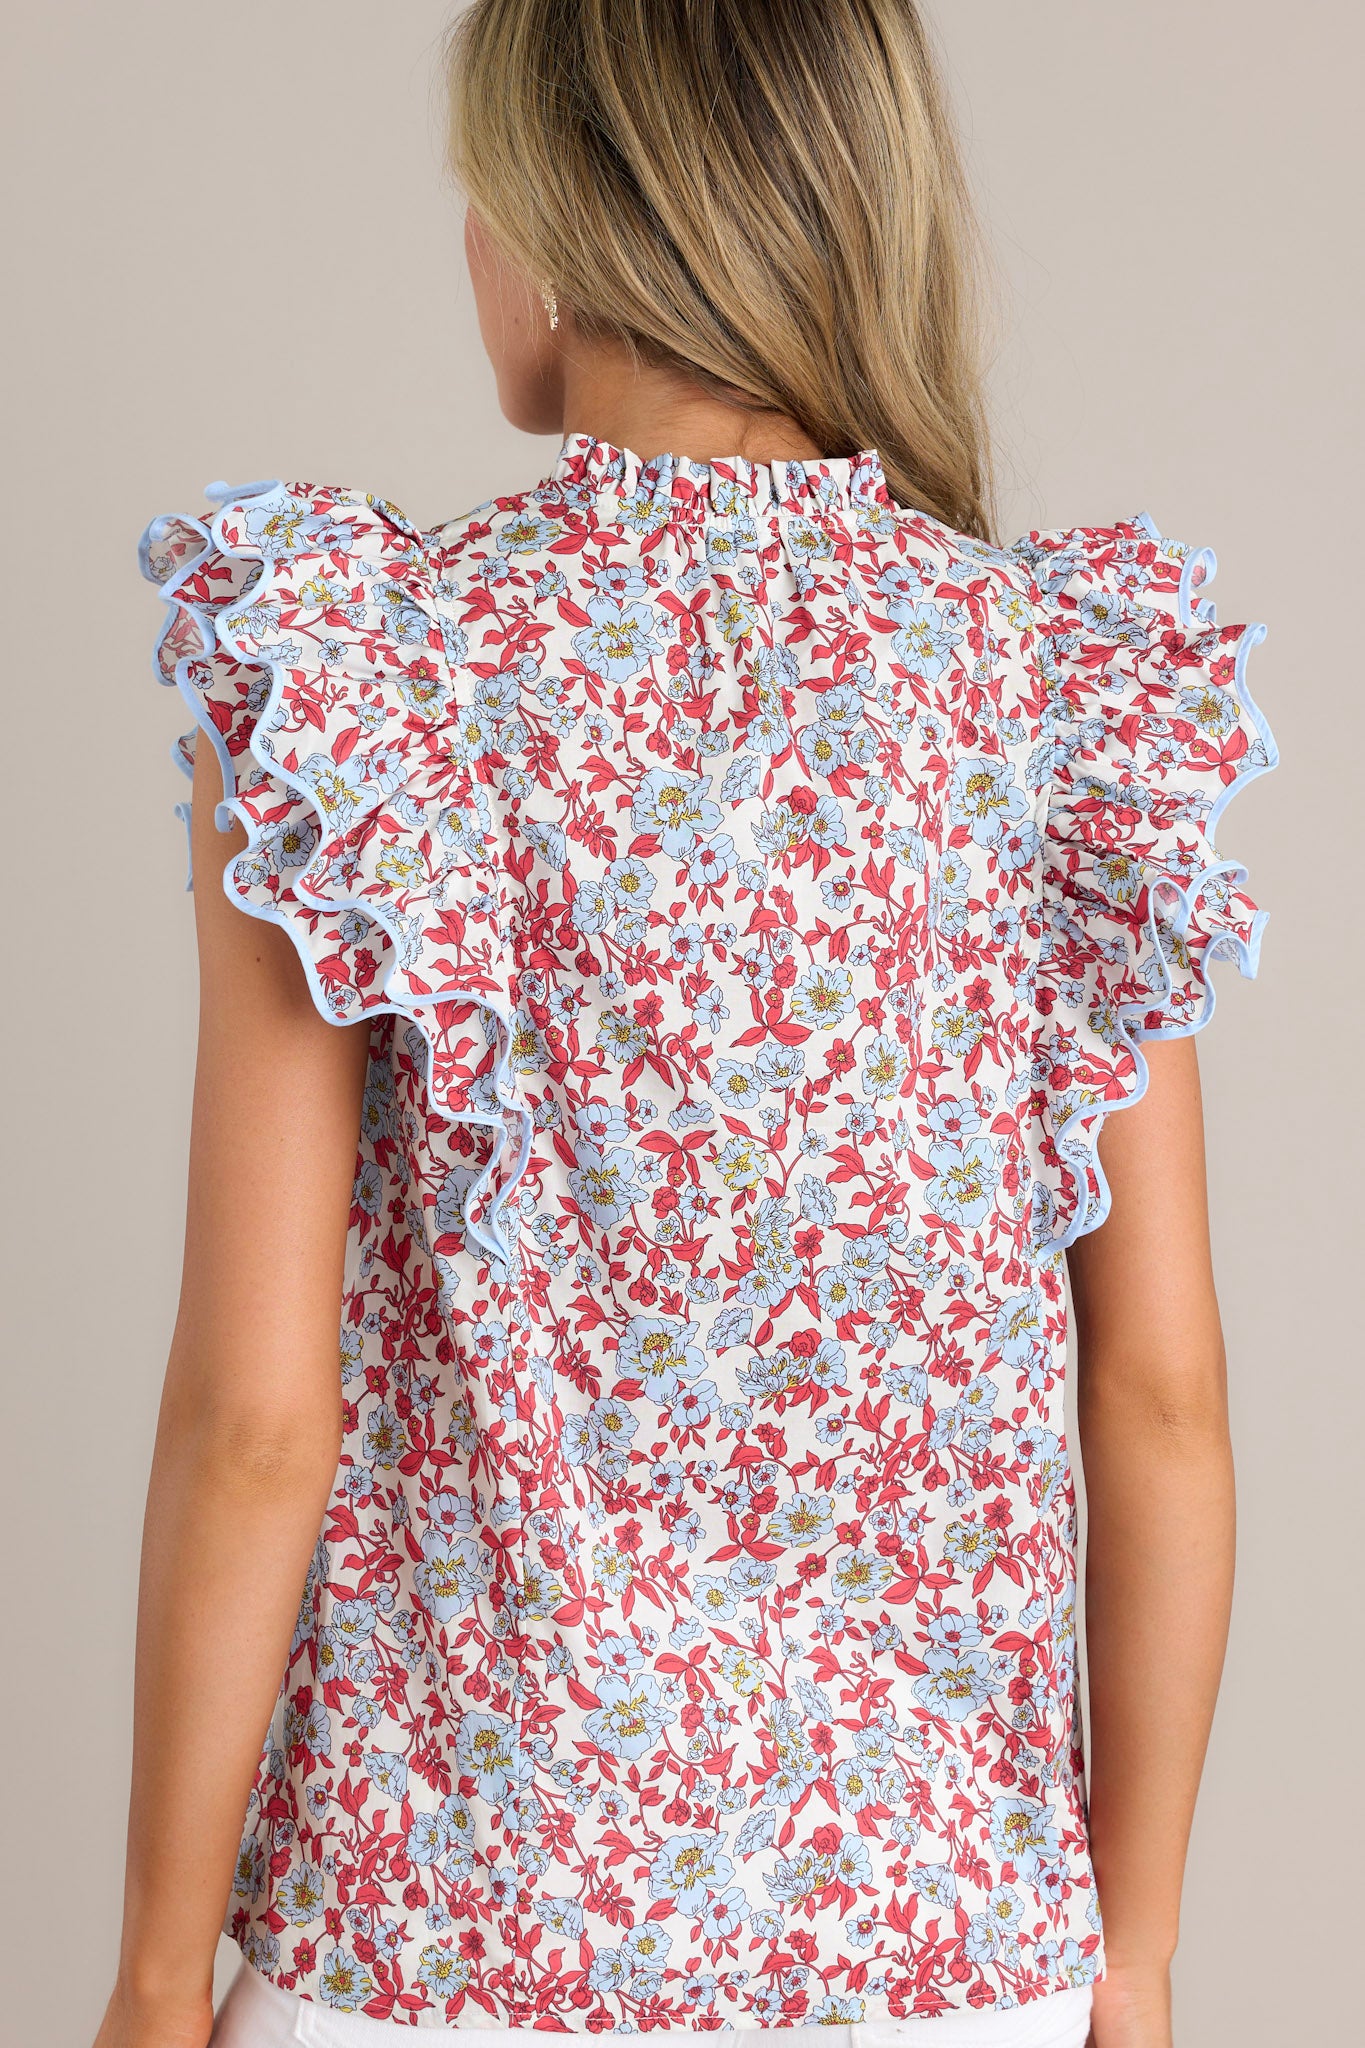 Back view of a red top highlighting the floral print and ruffled short sleeves with ricrac detailing.